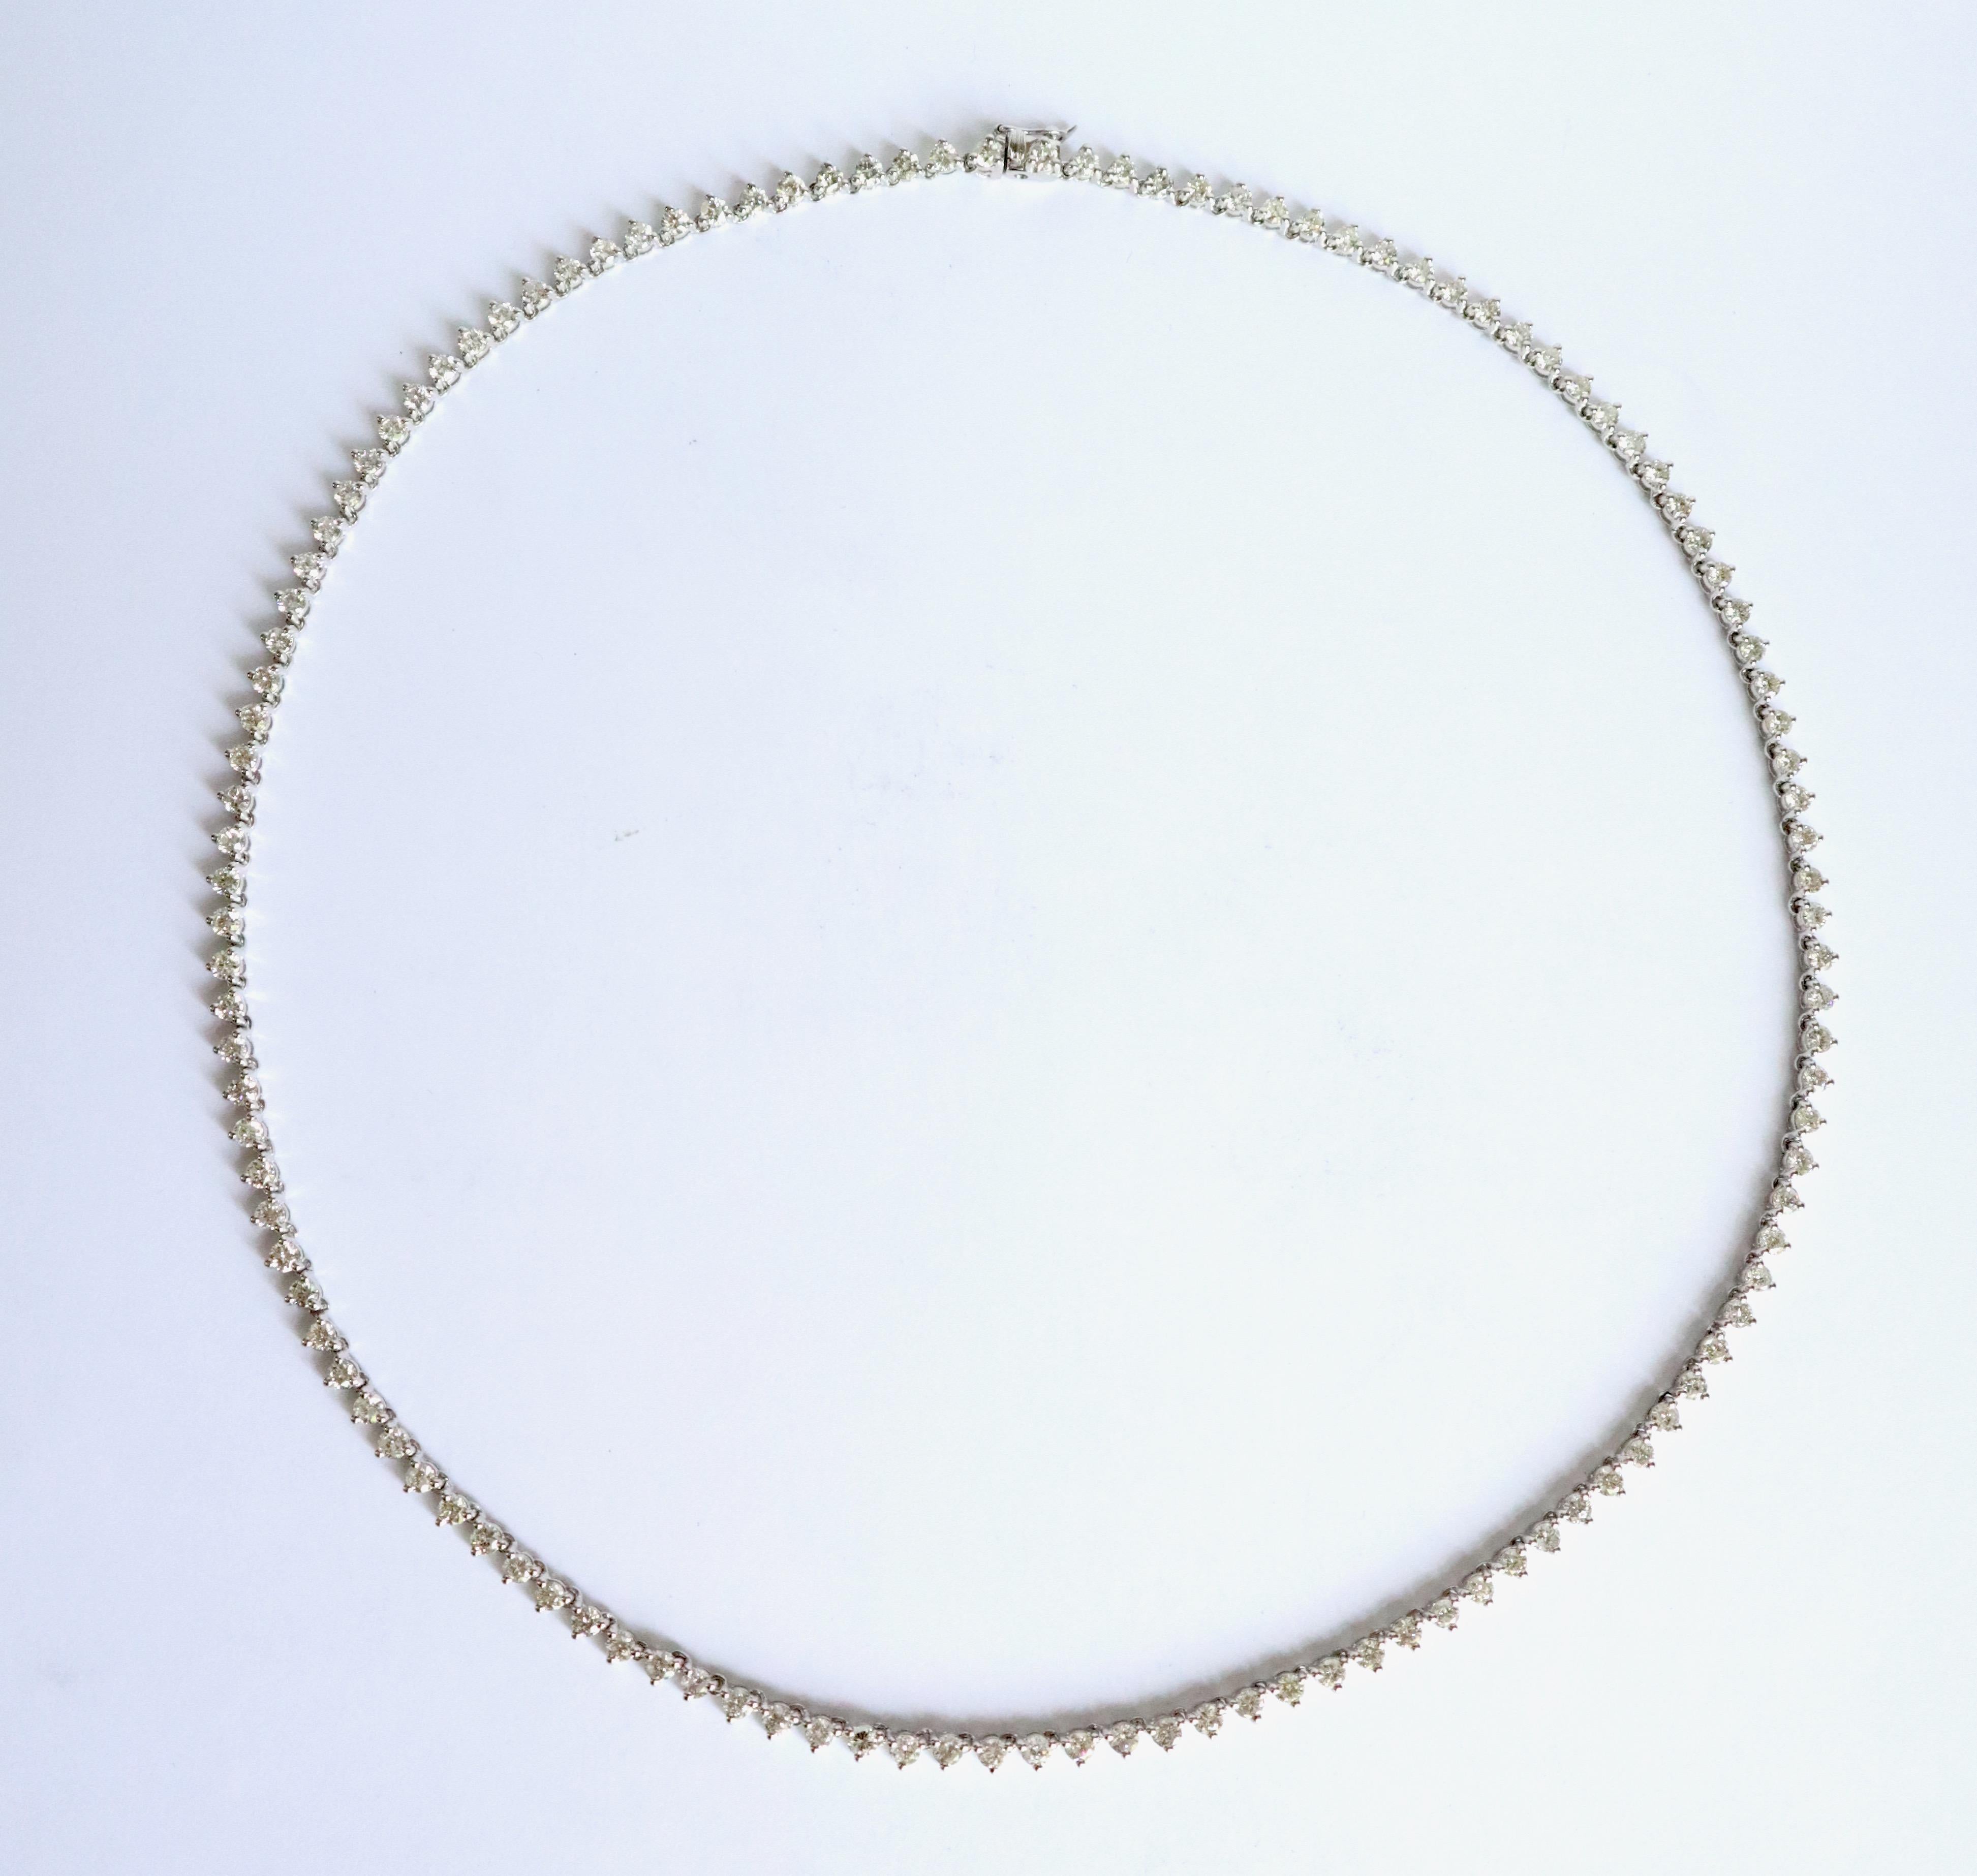 18-carat white gold necklace composed of a line of 121 round brilliant-cut diamonds. Weighing approximately 0.1 carat each. Each diamond is set with 3 prongs.
Total weight of 121 diamonds: 10.30 carats. G-H-SI quality. 
Gross weight : 24.6g.